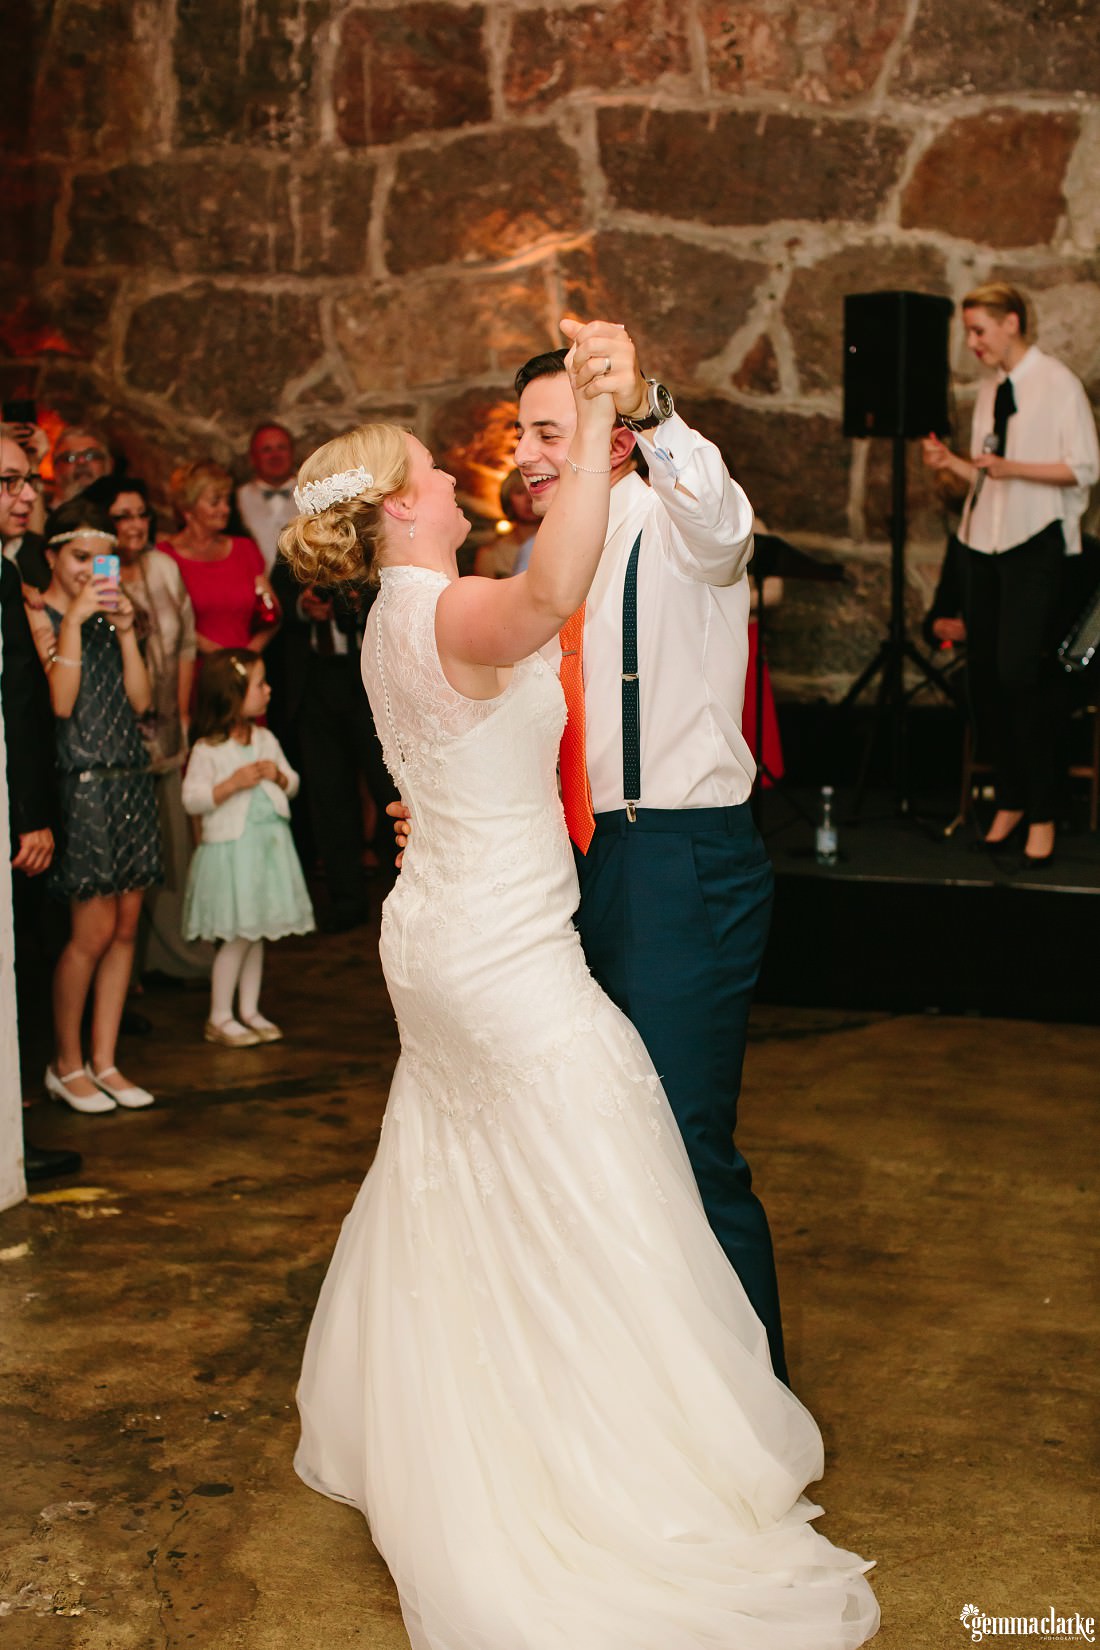 A smiling groom dancing with his bride